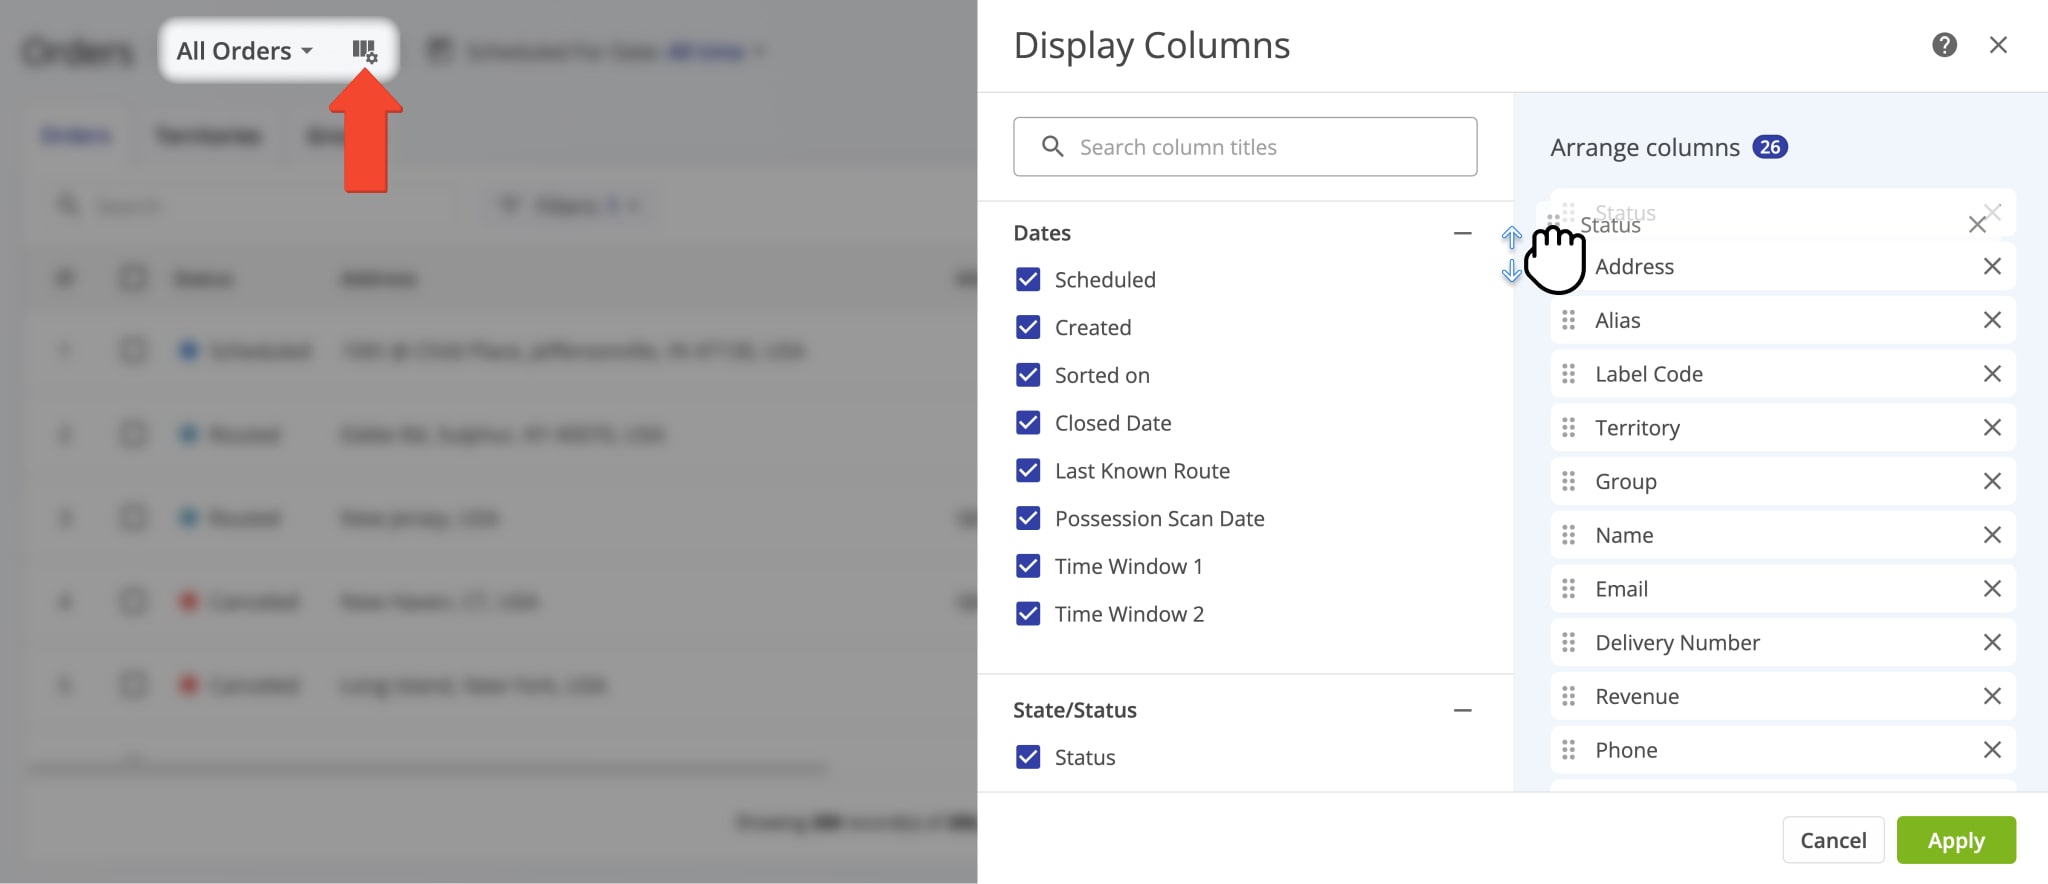 Customize the data columns displayed in your Orders List and their positions.